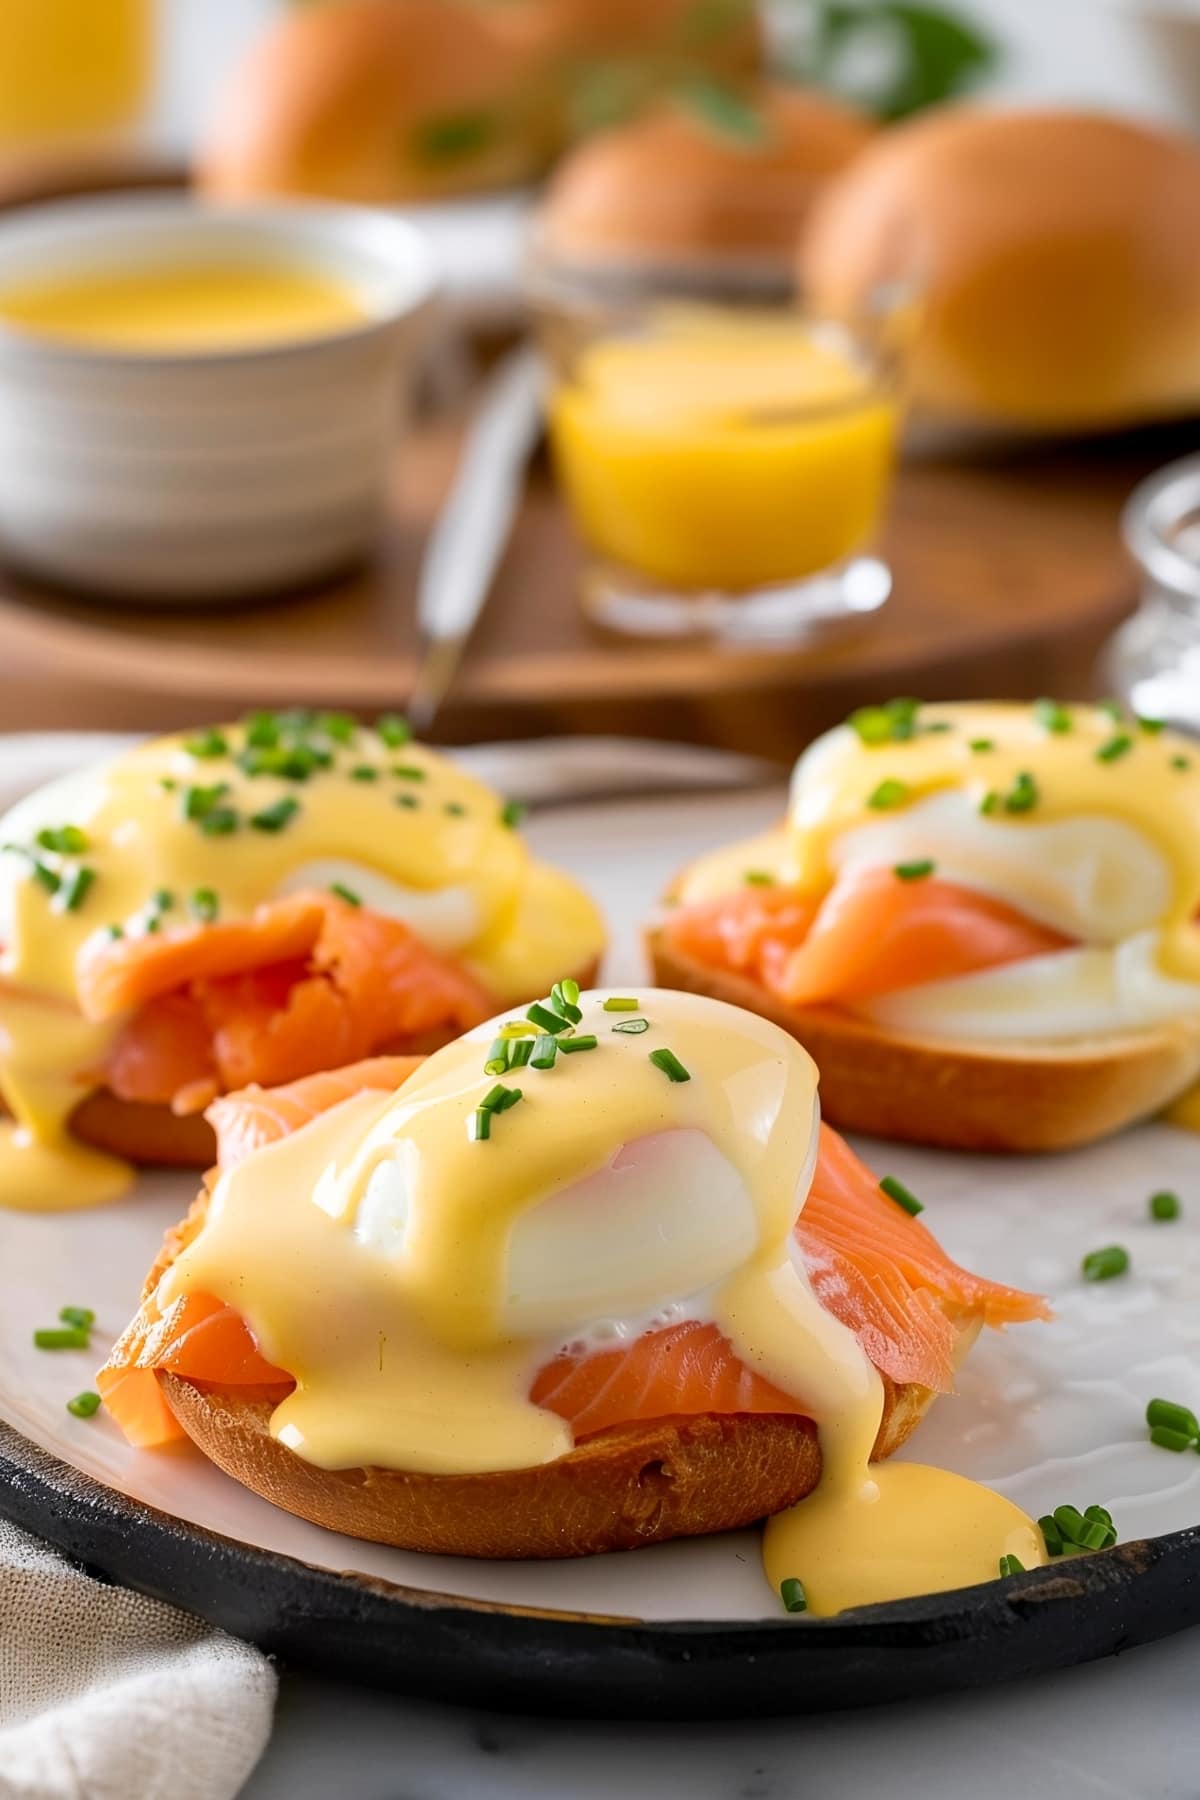 Homemade eggs benedict with hollandaise sauce and salmon